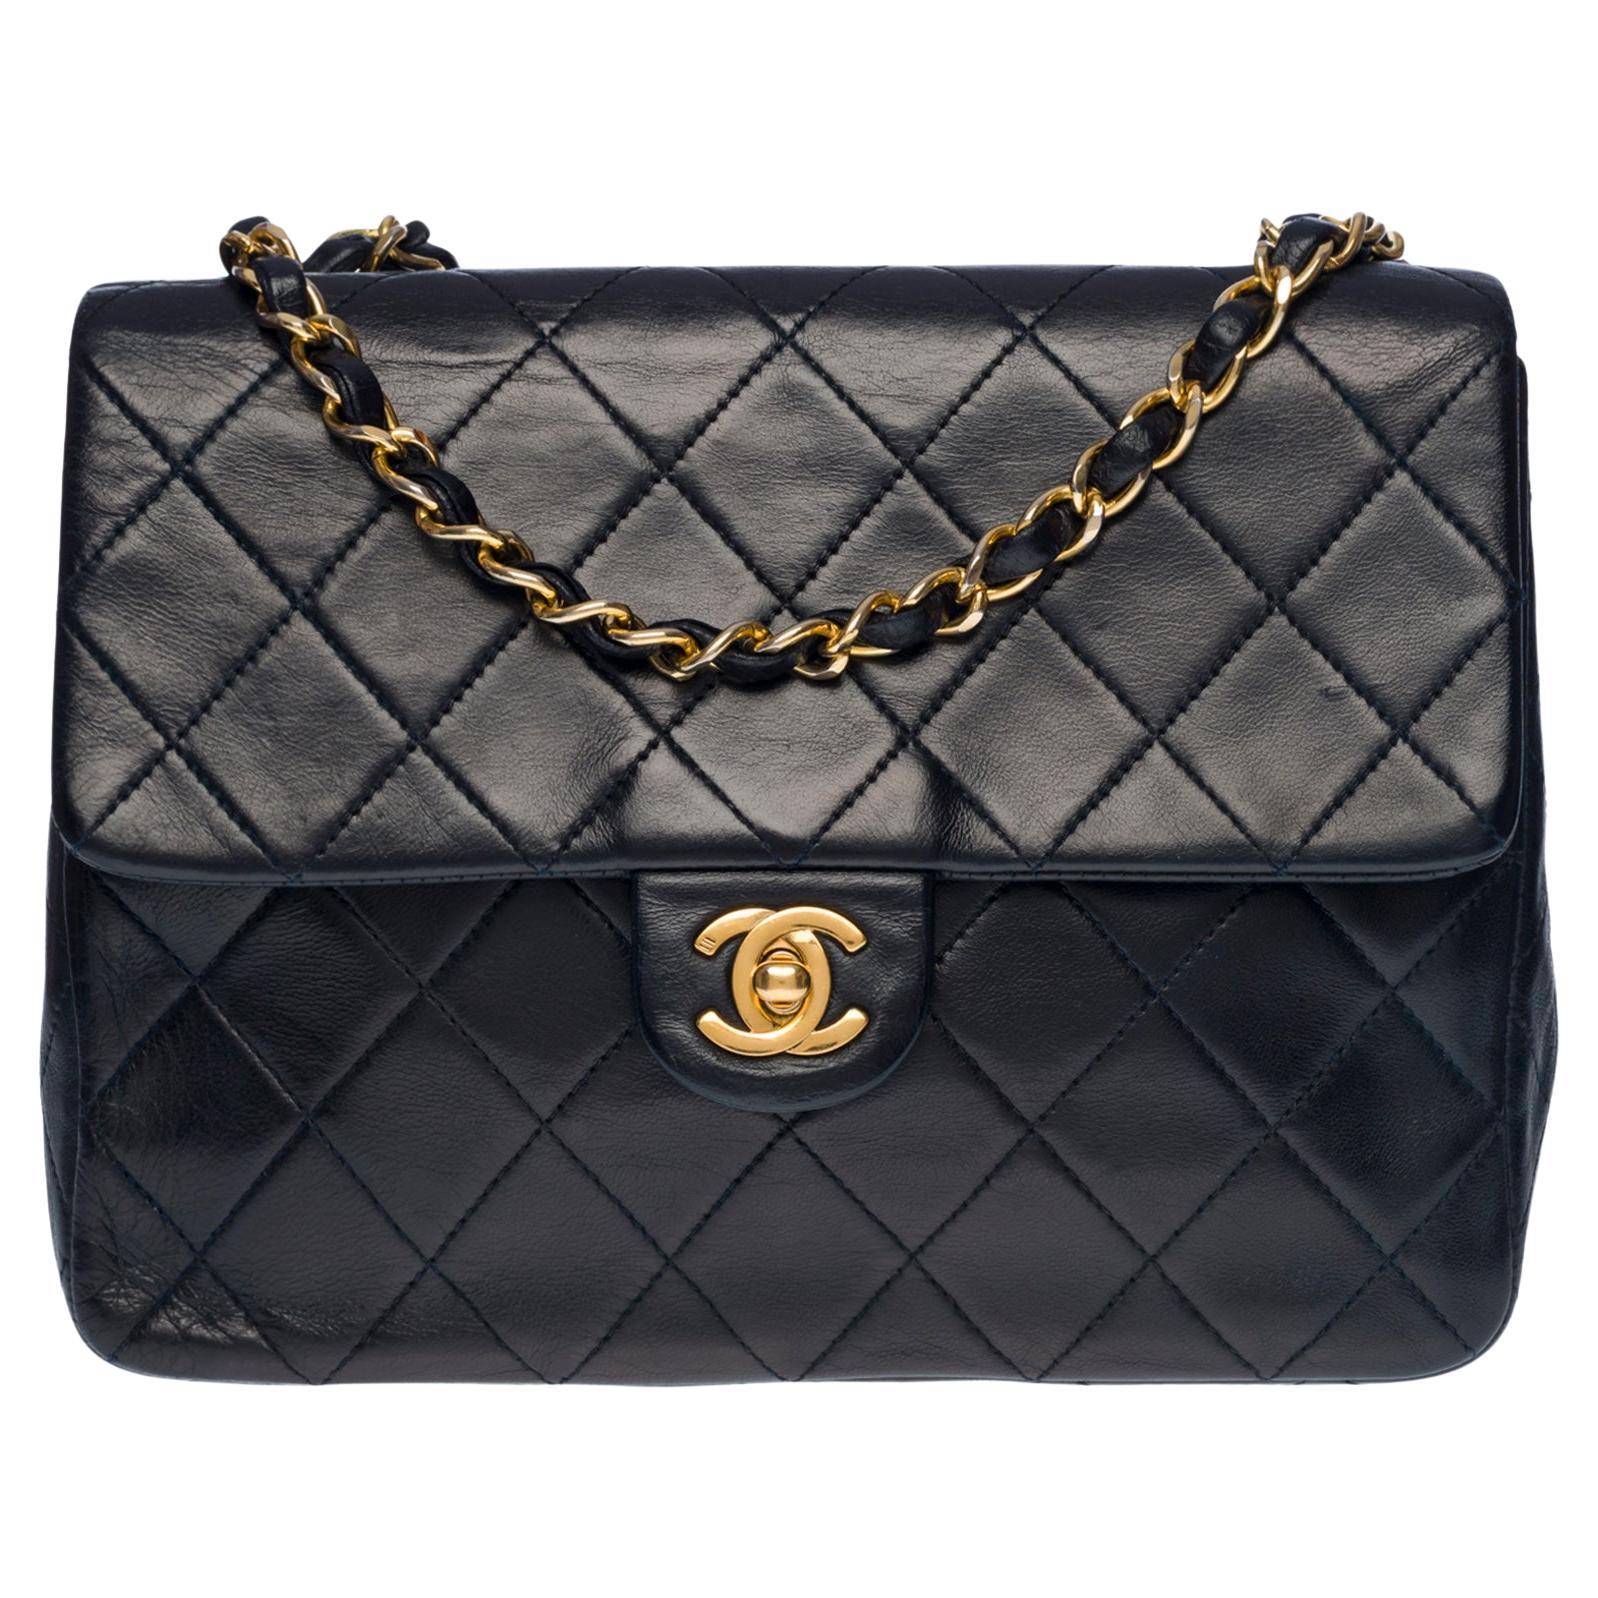 CHANEL Mini Timeless flap shoulder bag in navy blue quilted lambskin